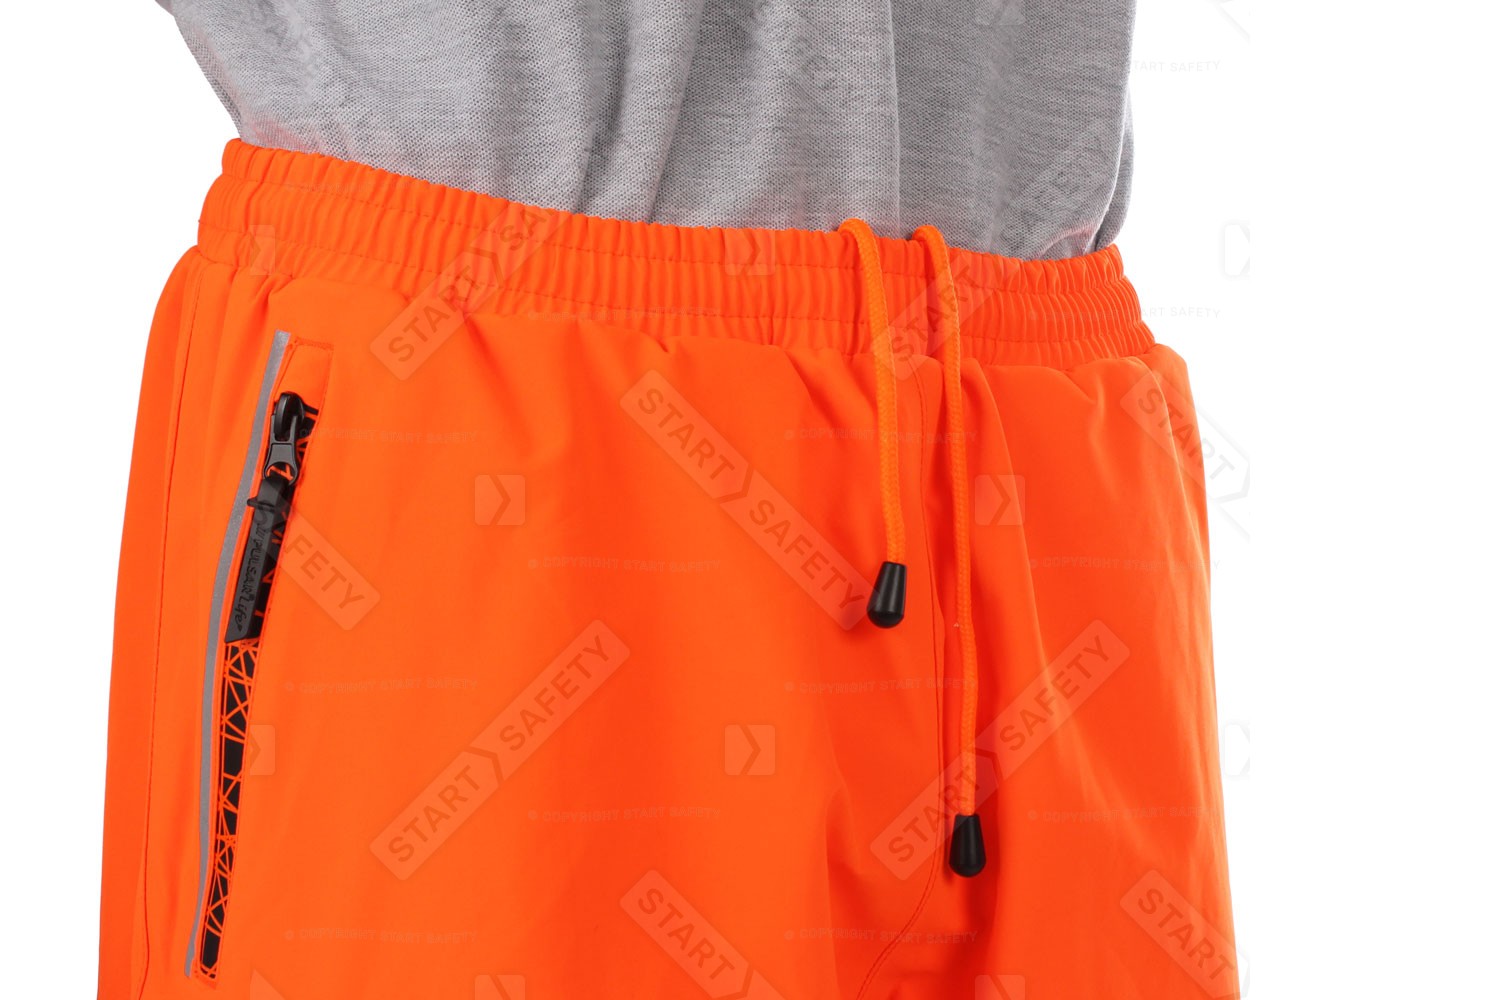 Elasticated Waistband With Adjusters